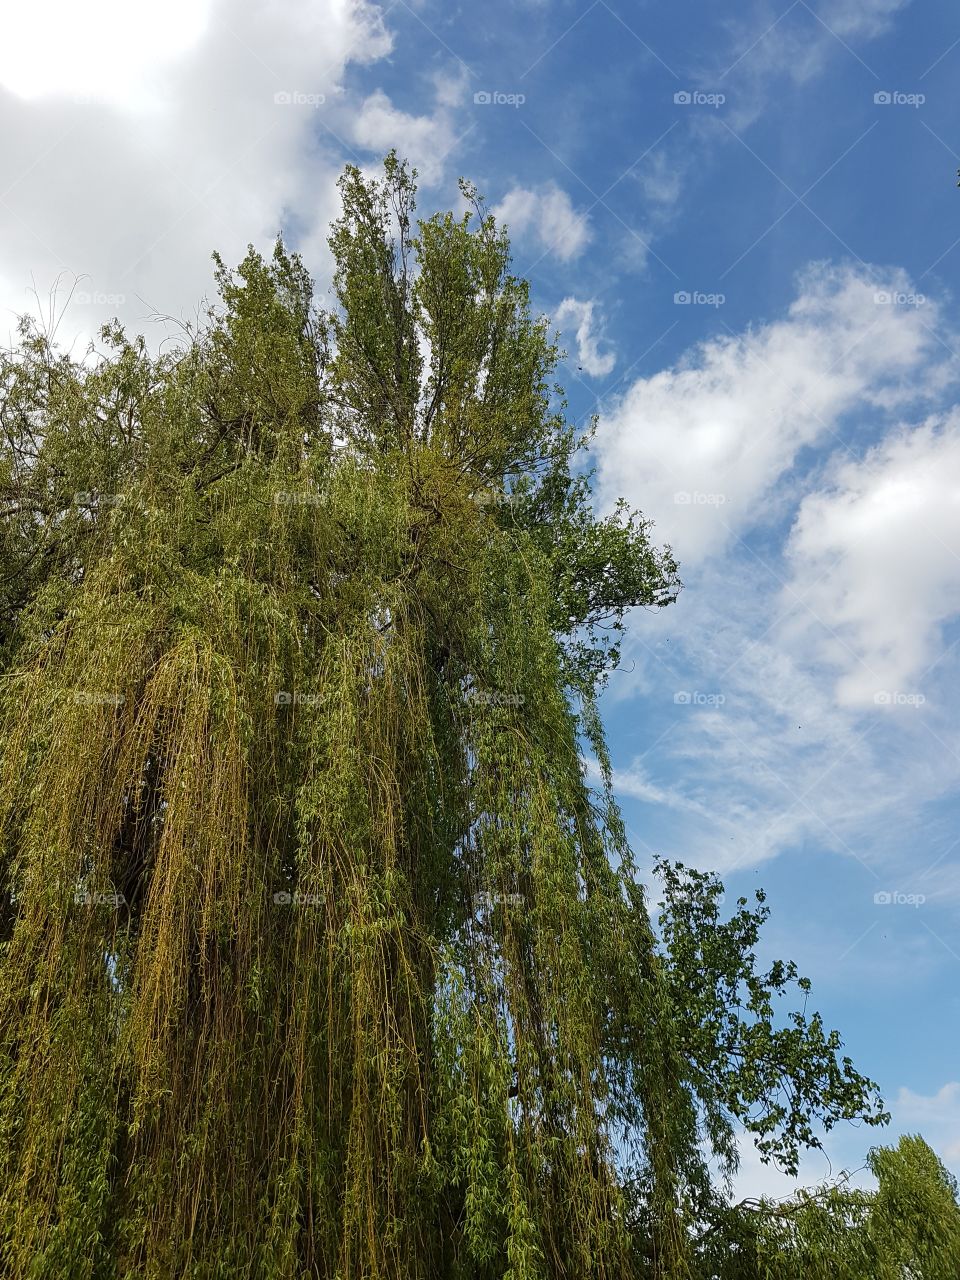 A willow tree against a cloudy blue sky